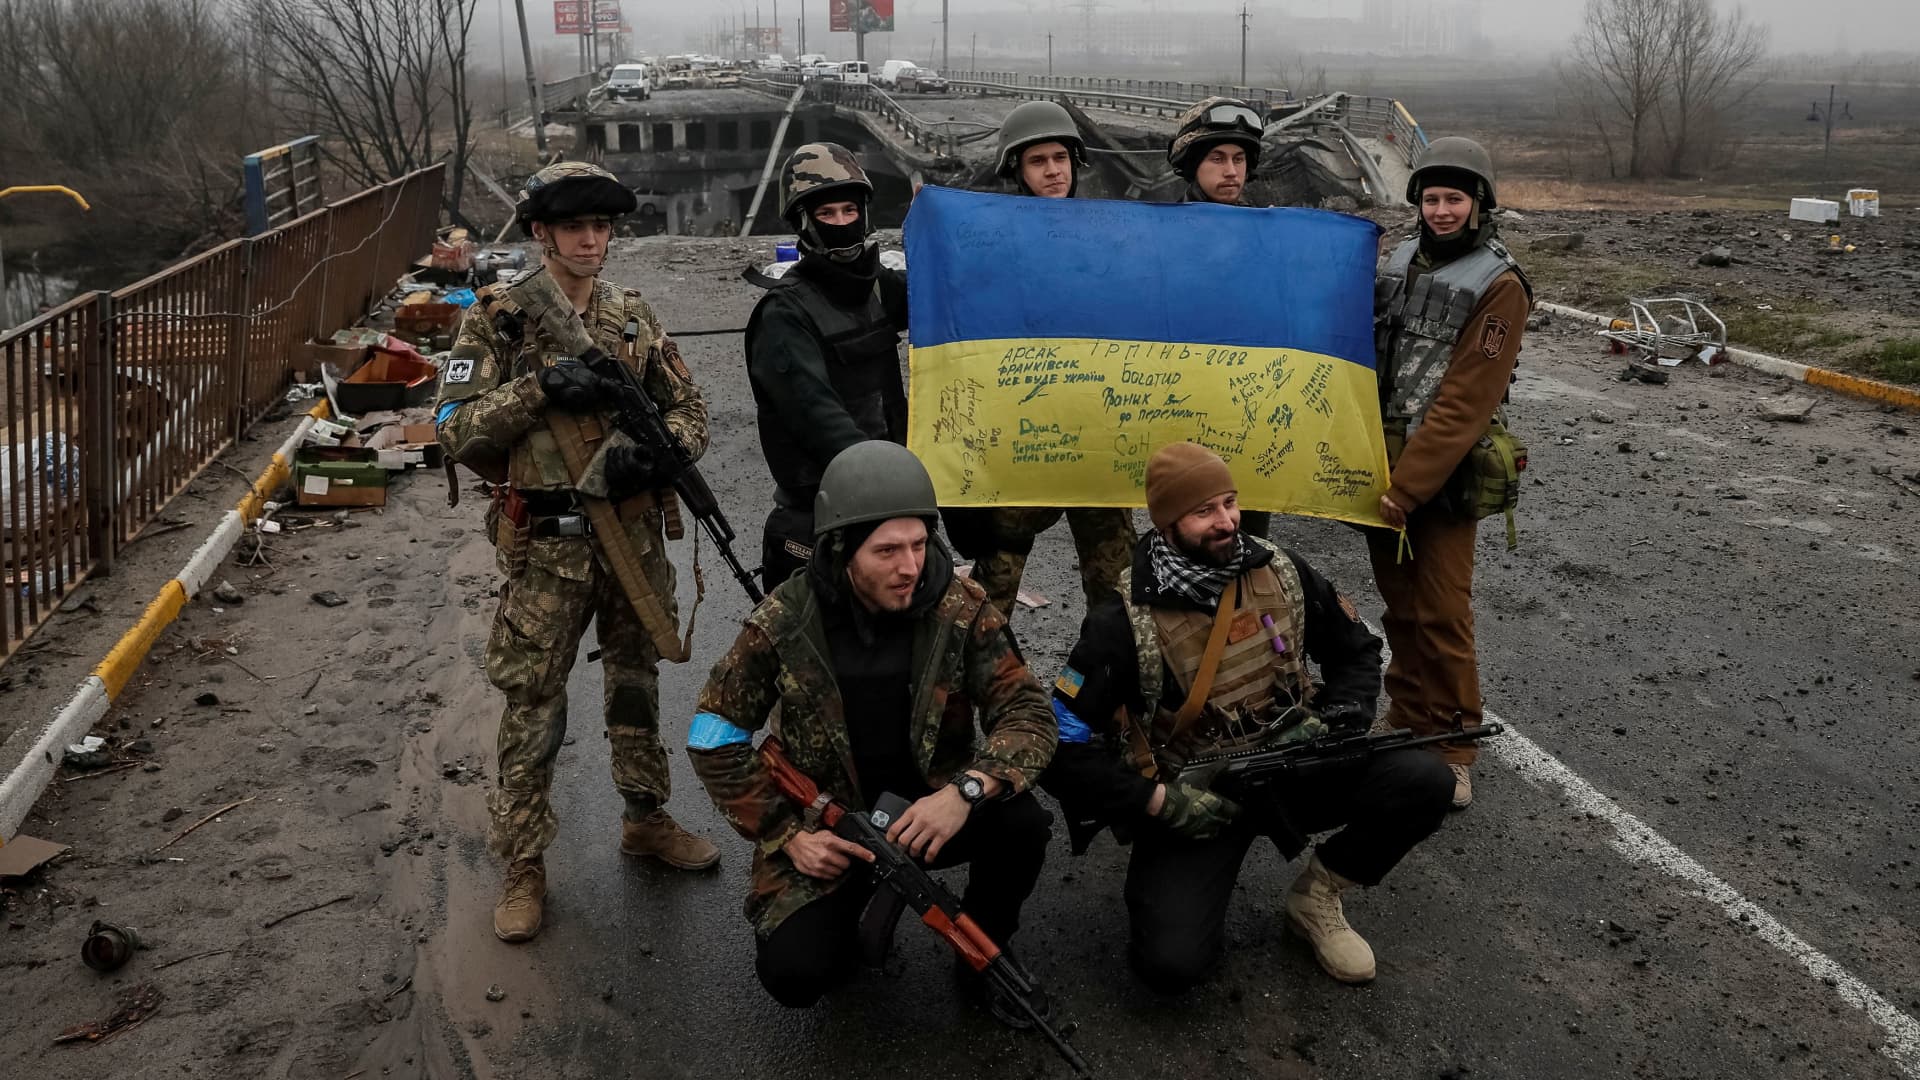 Ukrainian servicemen pose for a picture near a destroyed bridge as Russia's invasion of Ukraine continues, in the town of Irpin outside Kyiv April 1, 2022. 